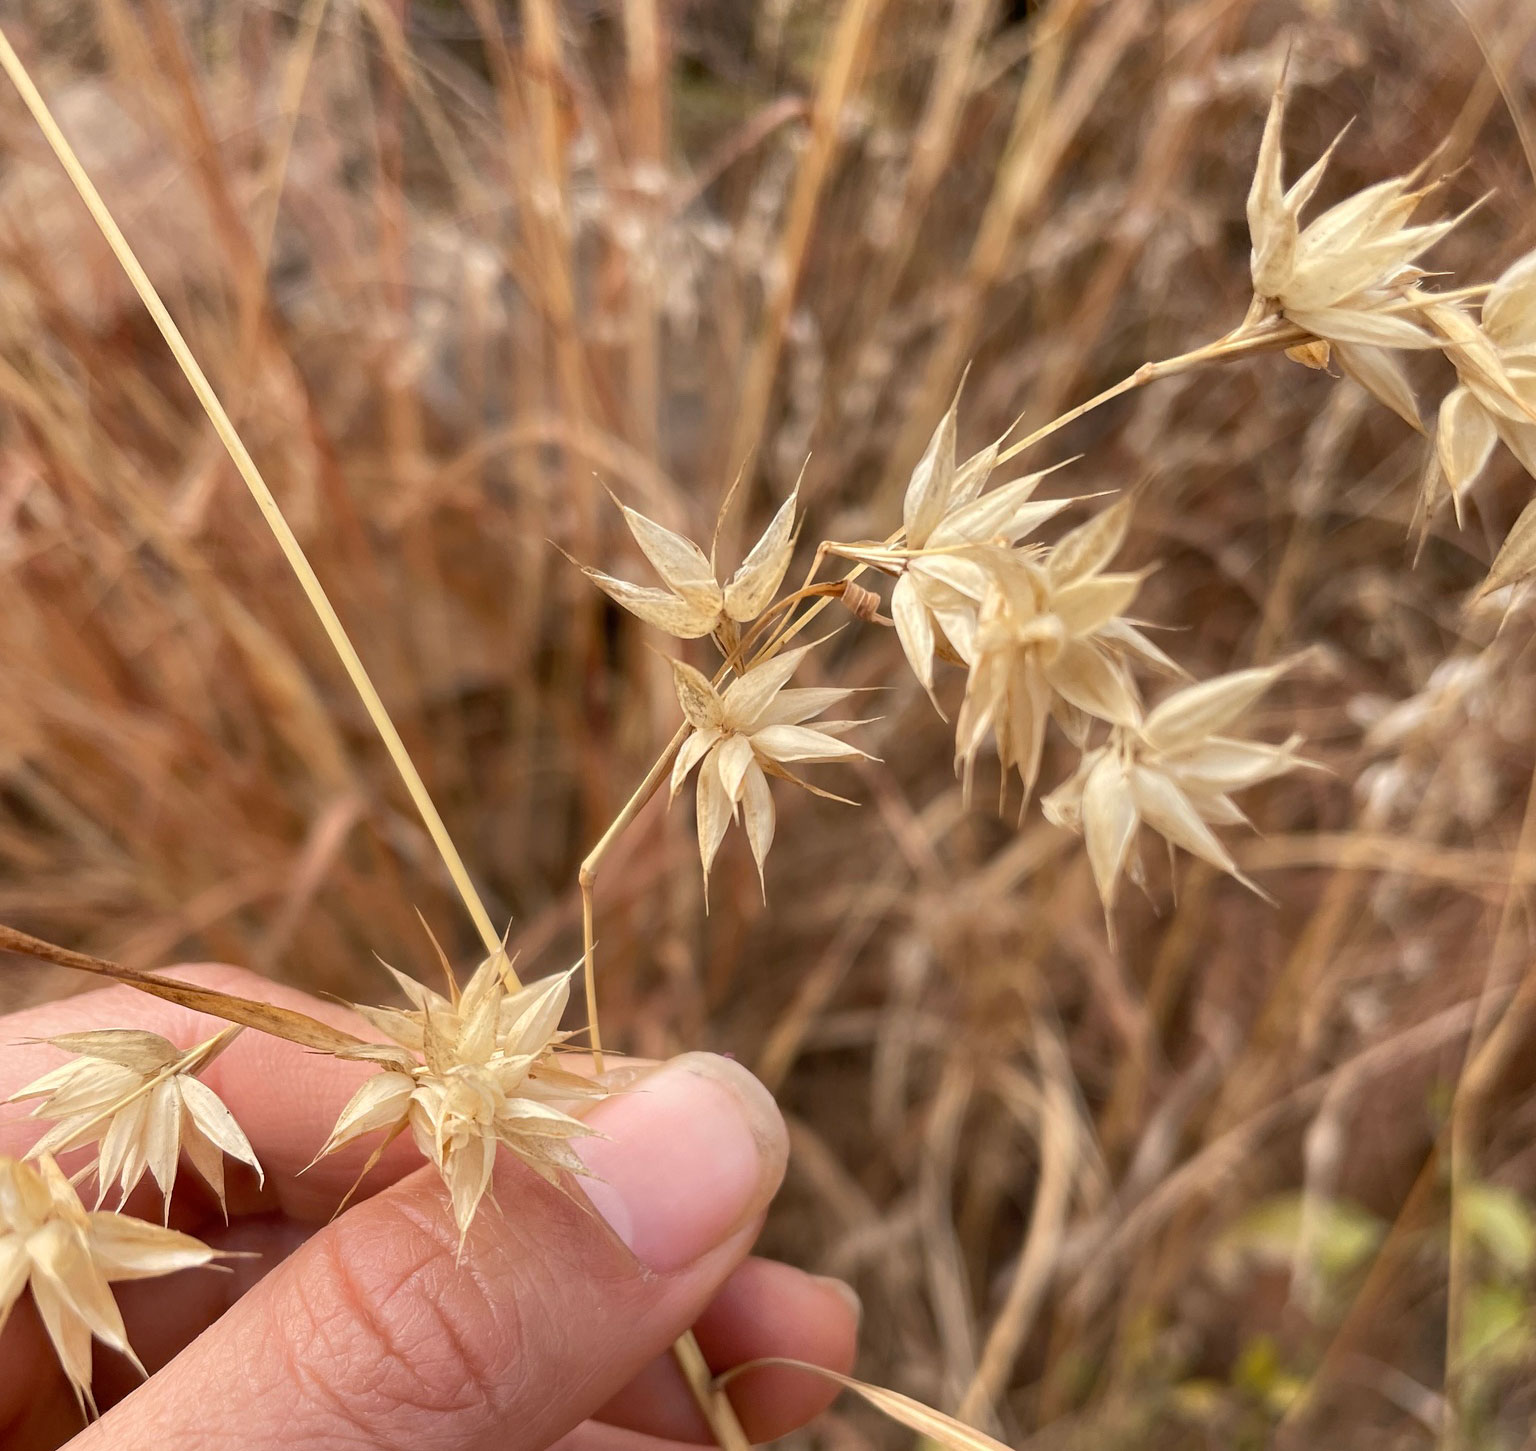 Photograph showing detail of Mauritian grass inflorescences. The photo shows a person's thumb and forefinger holding a dried grass. The inflorescences are short with dried bracts, each bearing a short awn.